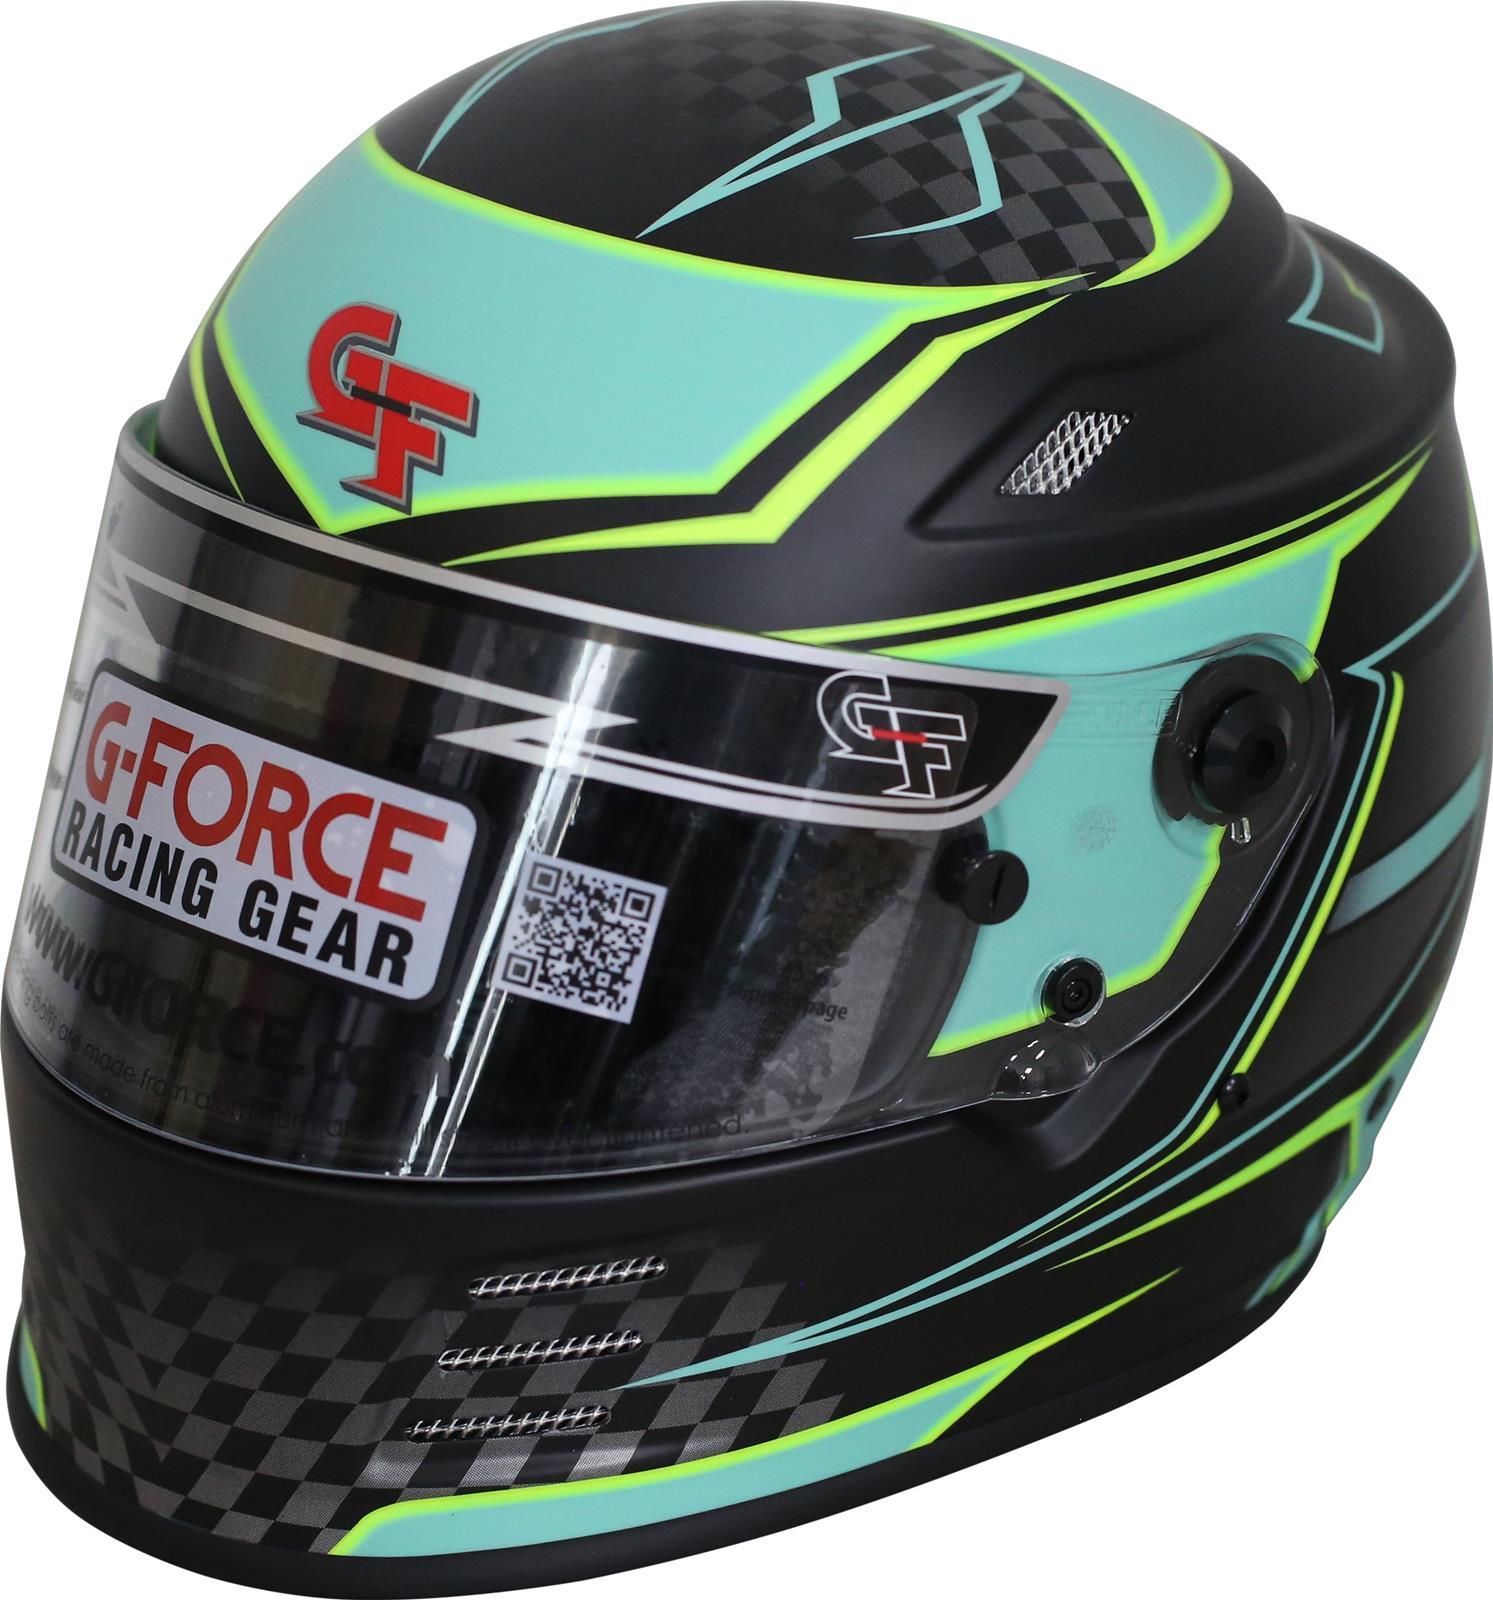 G-Force Racing Gear 13005SMLTL Helmet, Revo Graphics, Full Face, Snell SA2020, Head and Neck Support Ready, Black / Teal, Small, Each